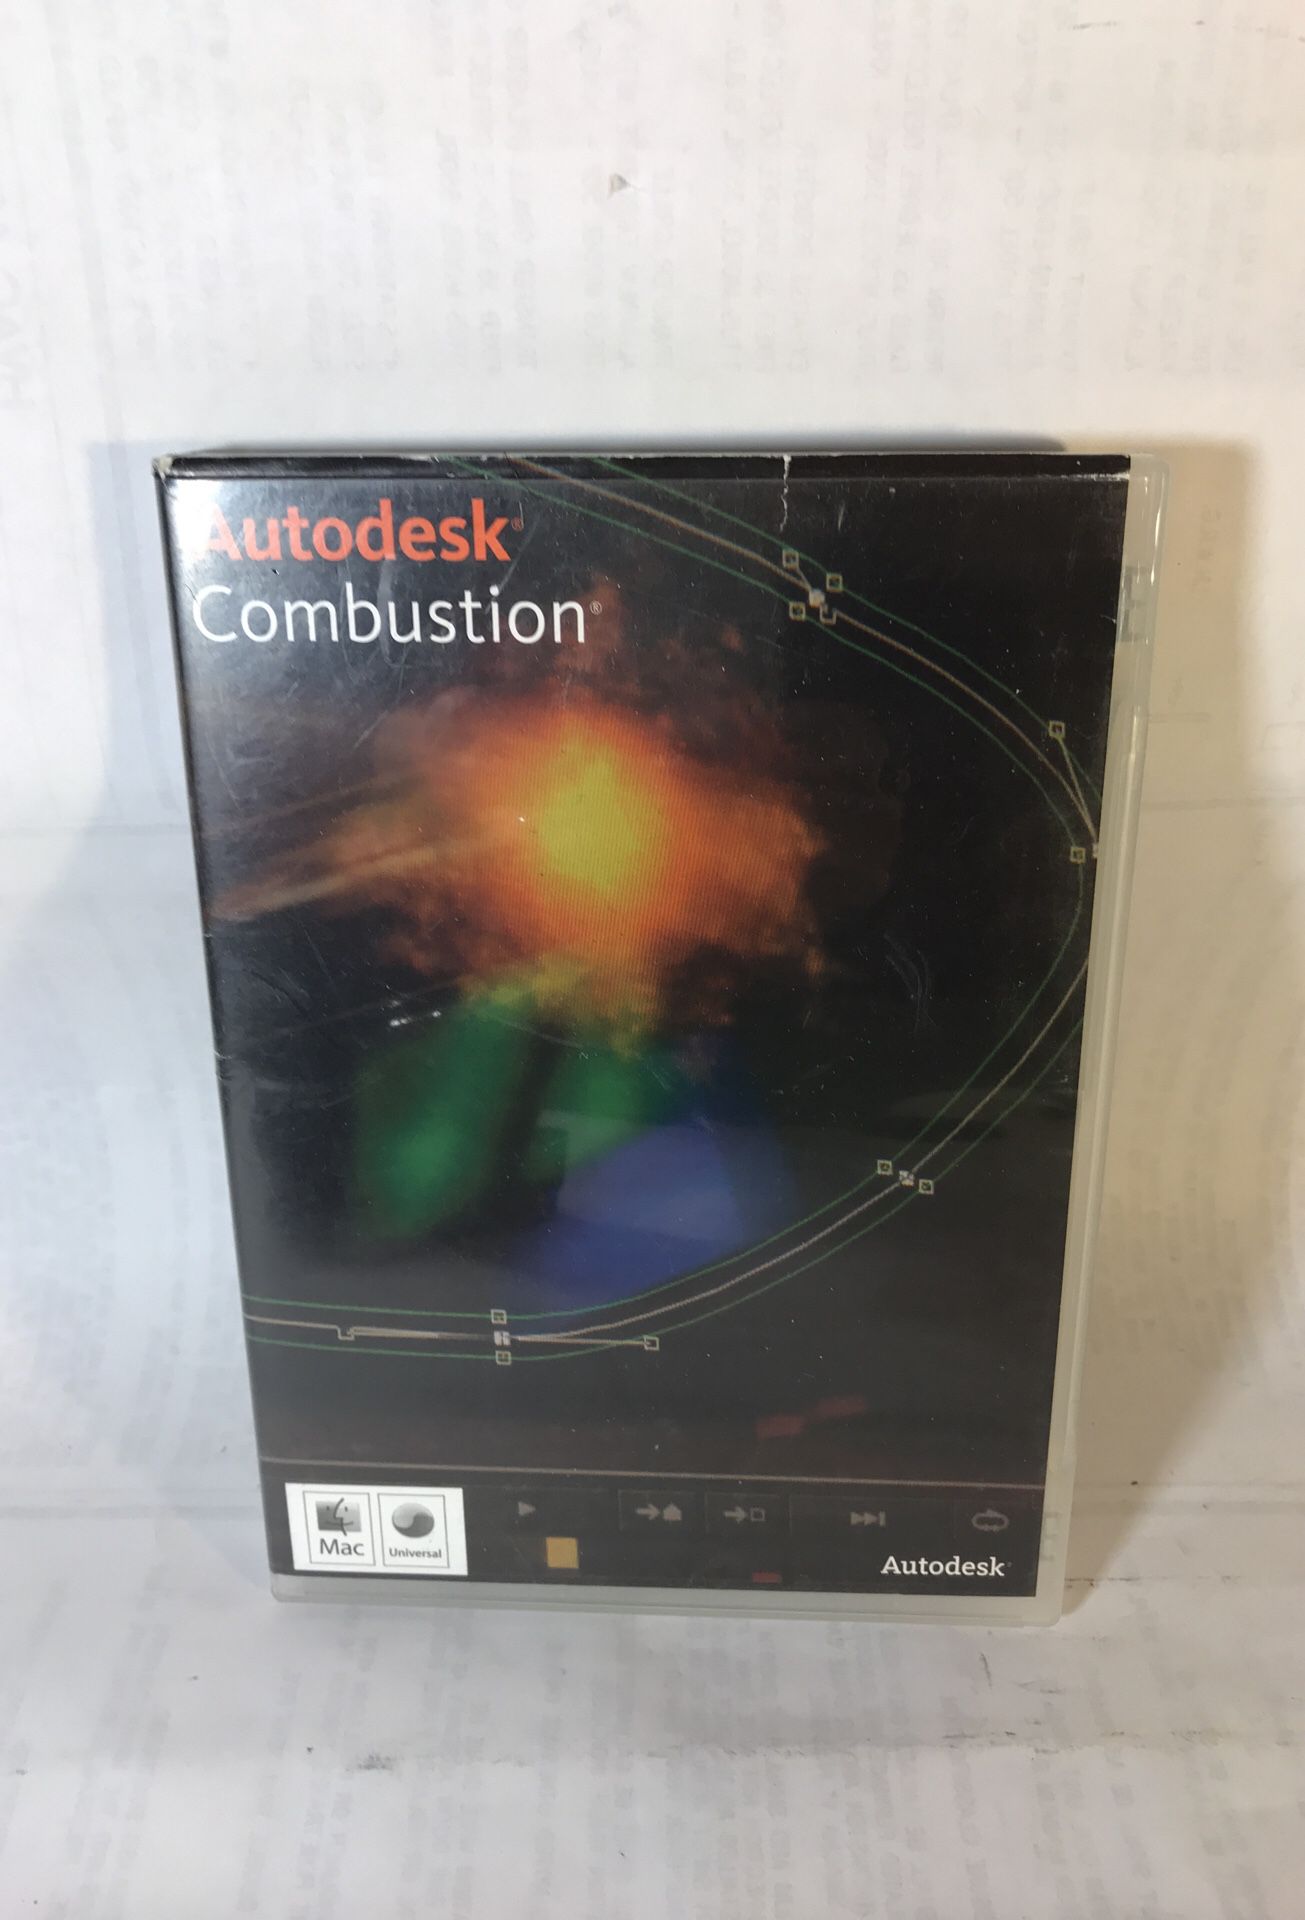 Autodesk Combustion 2008 for Mac